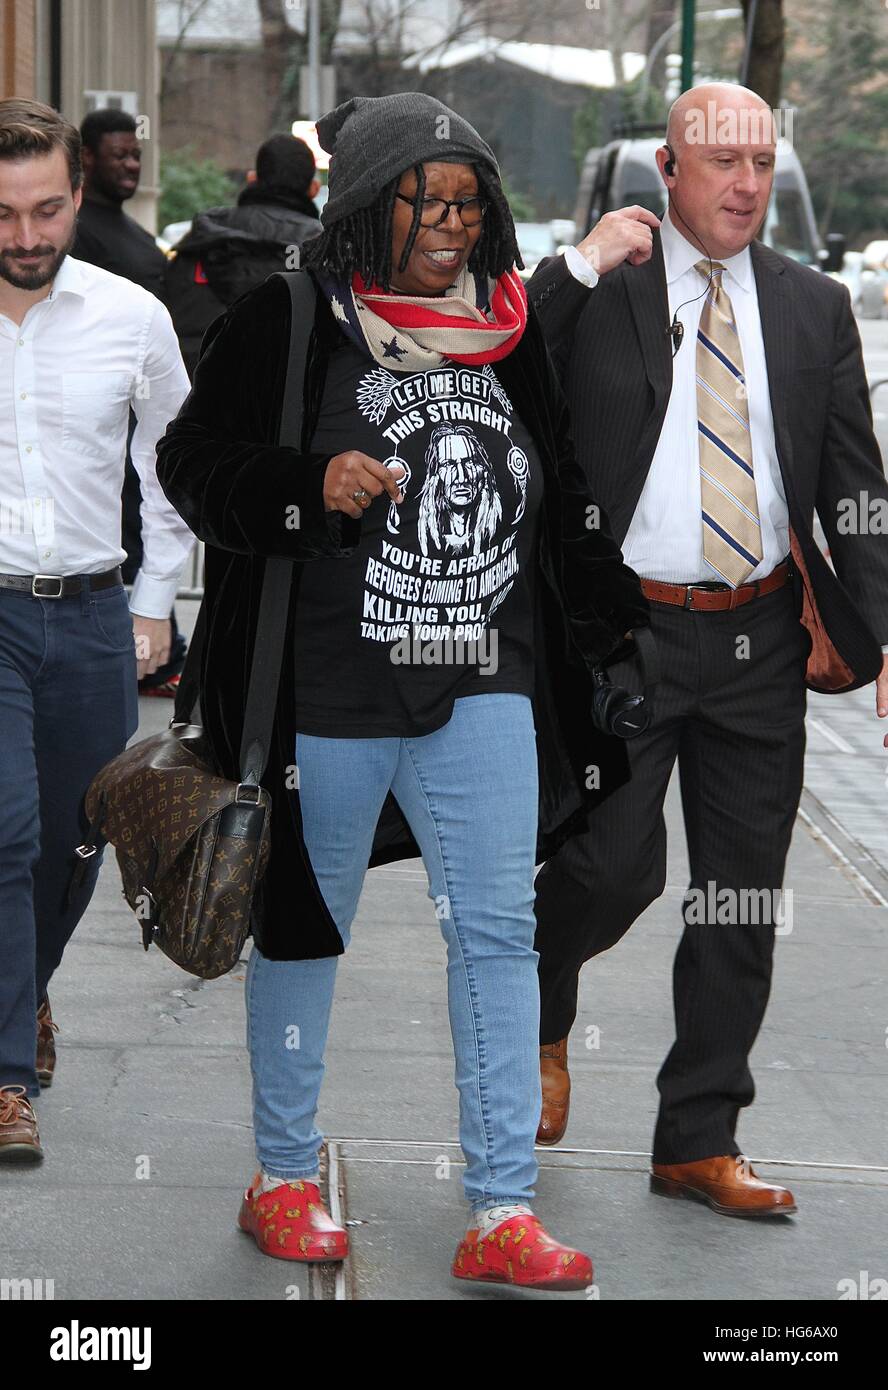 New York, NY, USA. 4th Jan, 2017. Whoopi Goldberg spotted leaving 'The View' wearing a graphic t-shirt of a Native America with the quote: 'Let me get this straight, you're afraid of refugees coming to America killing you and taking your property?' as well as an American Flag-inspired scarf in New York on January 4, 2017. © Rainmaker Photo/Media Punch/Alamy Live News Stock Photo